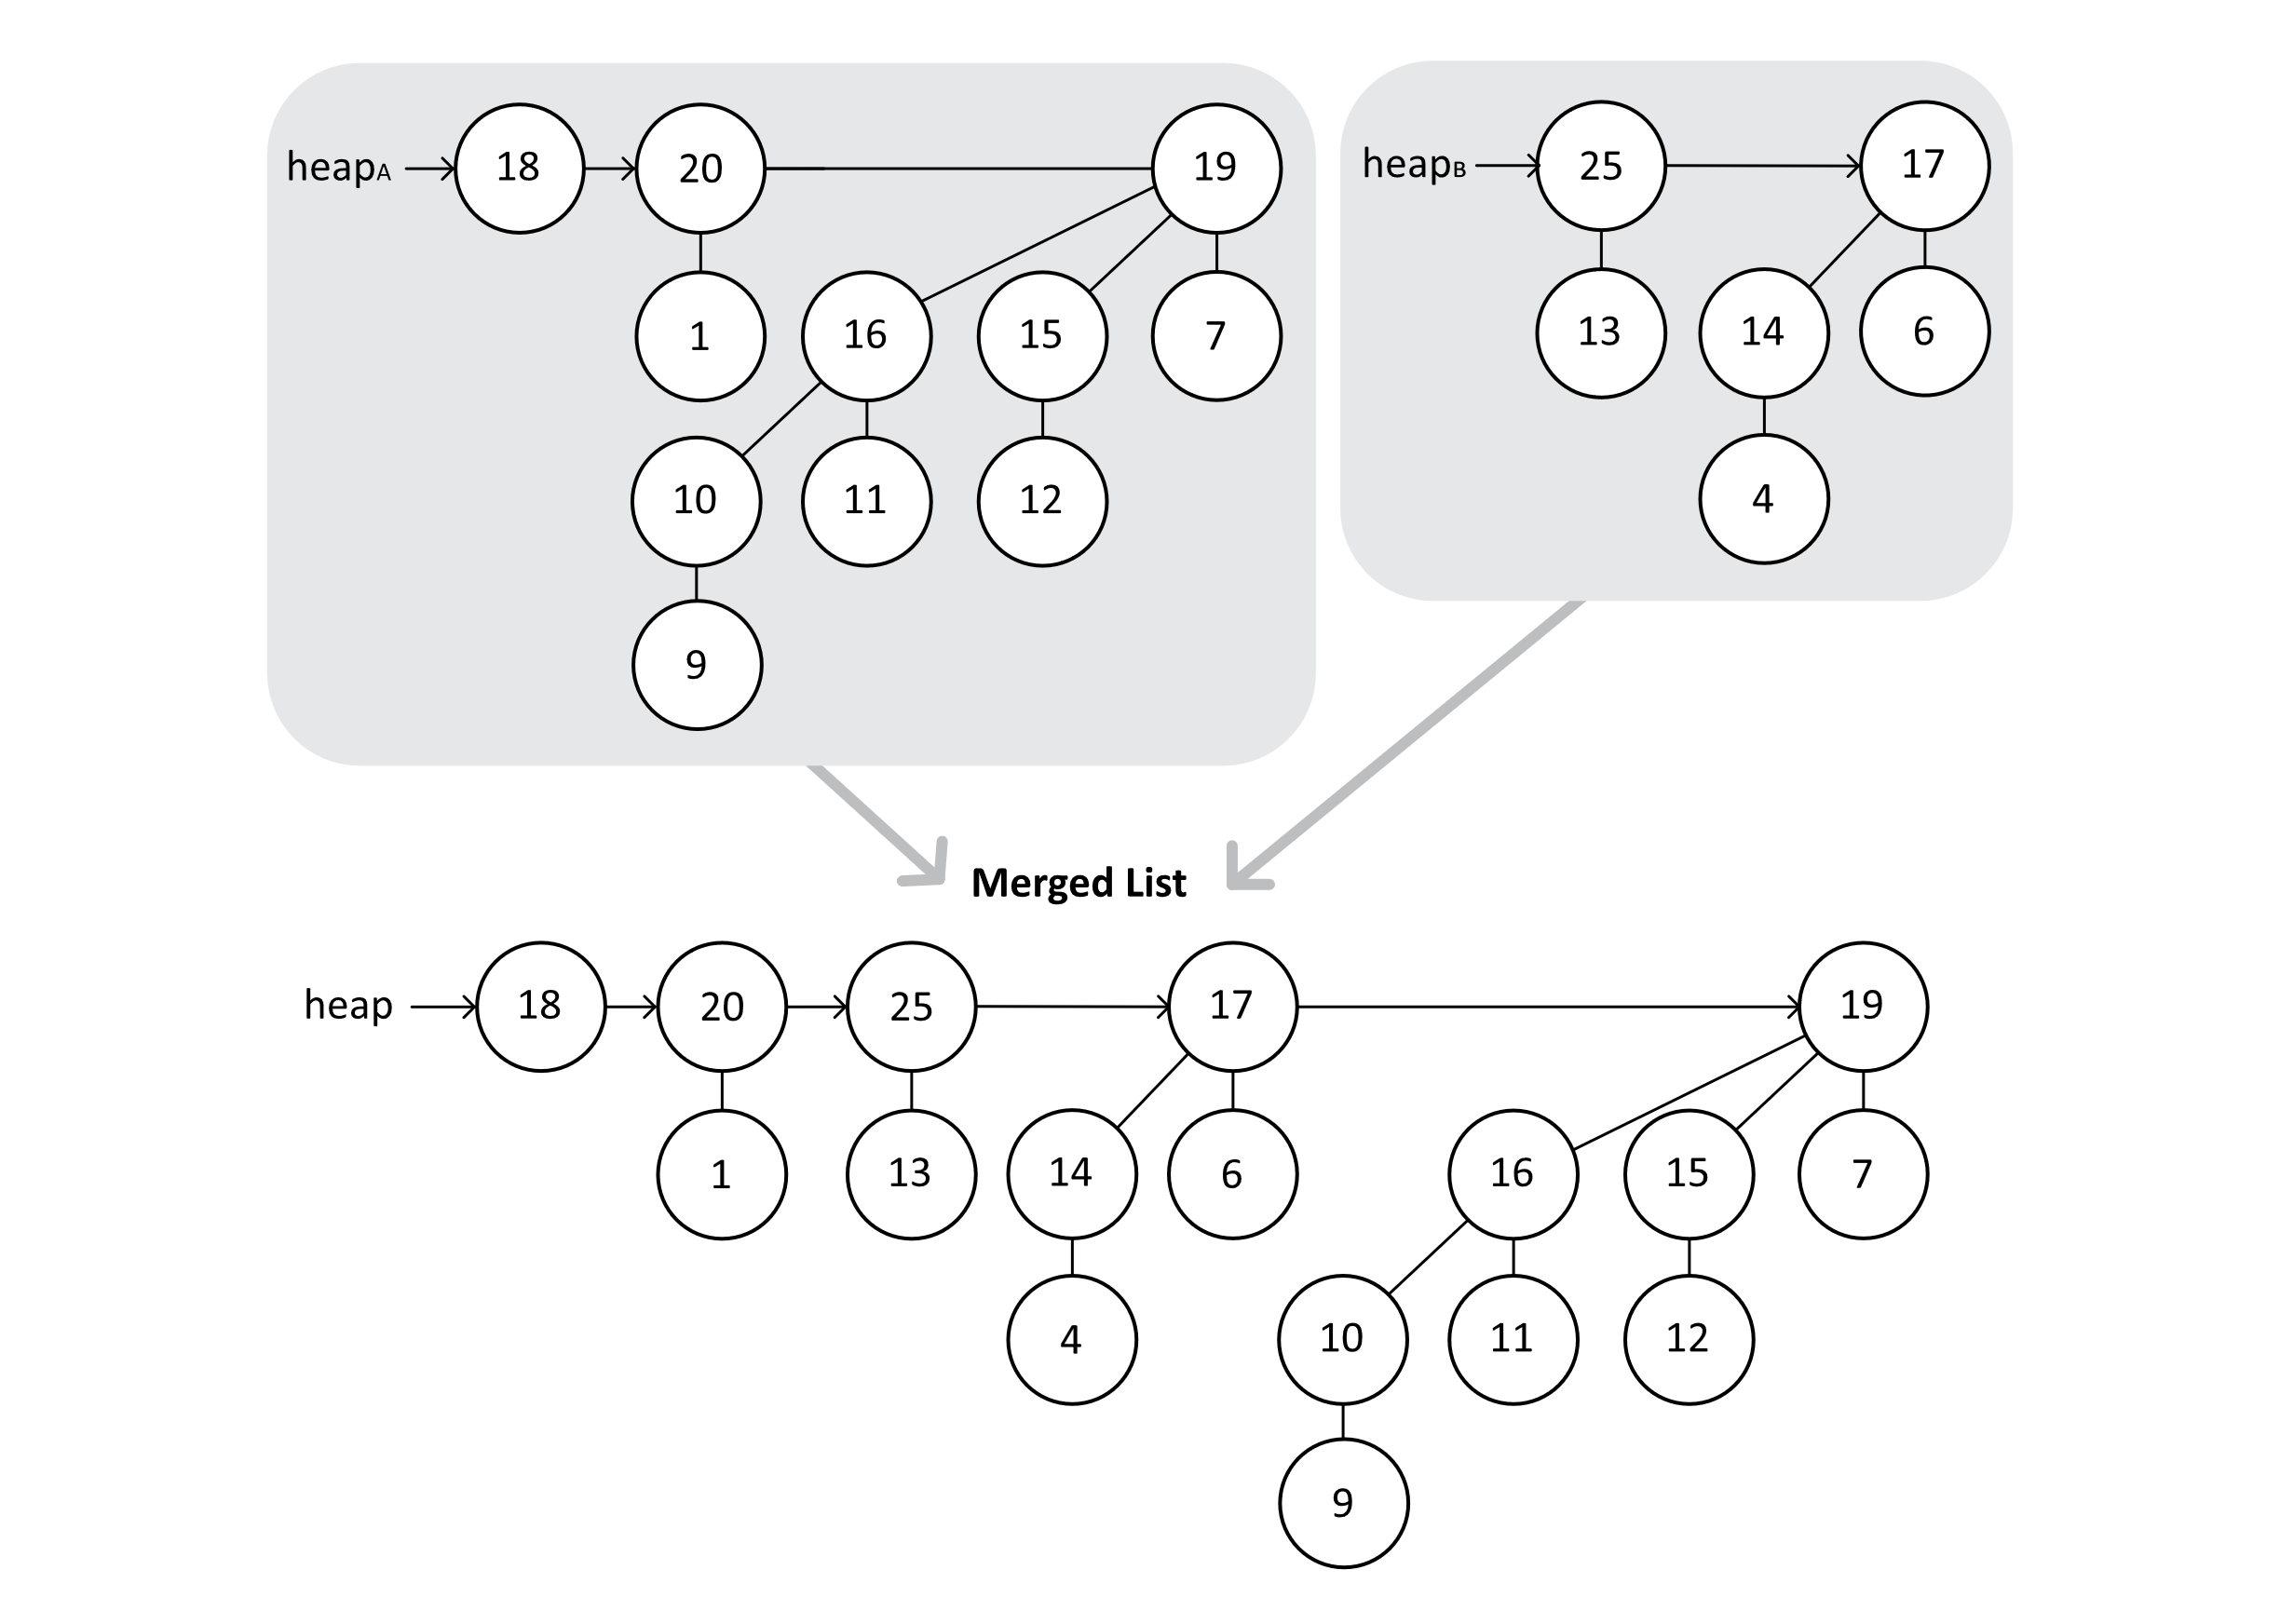 An intermediate stage of a binomial heap union. This represents the state of the heap list after a merge, but before resolving all the binomial trees.